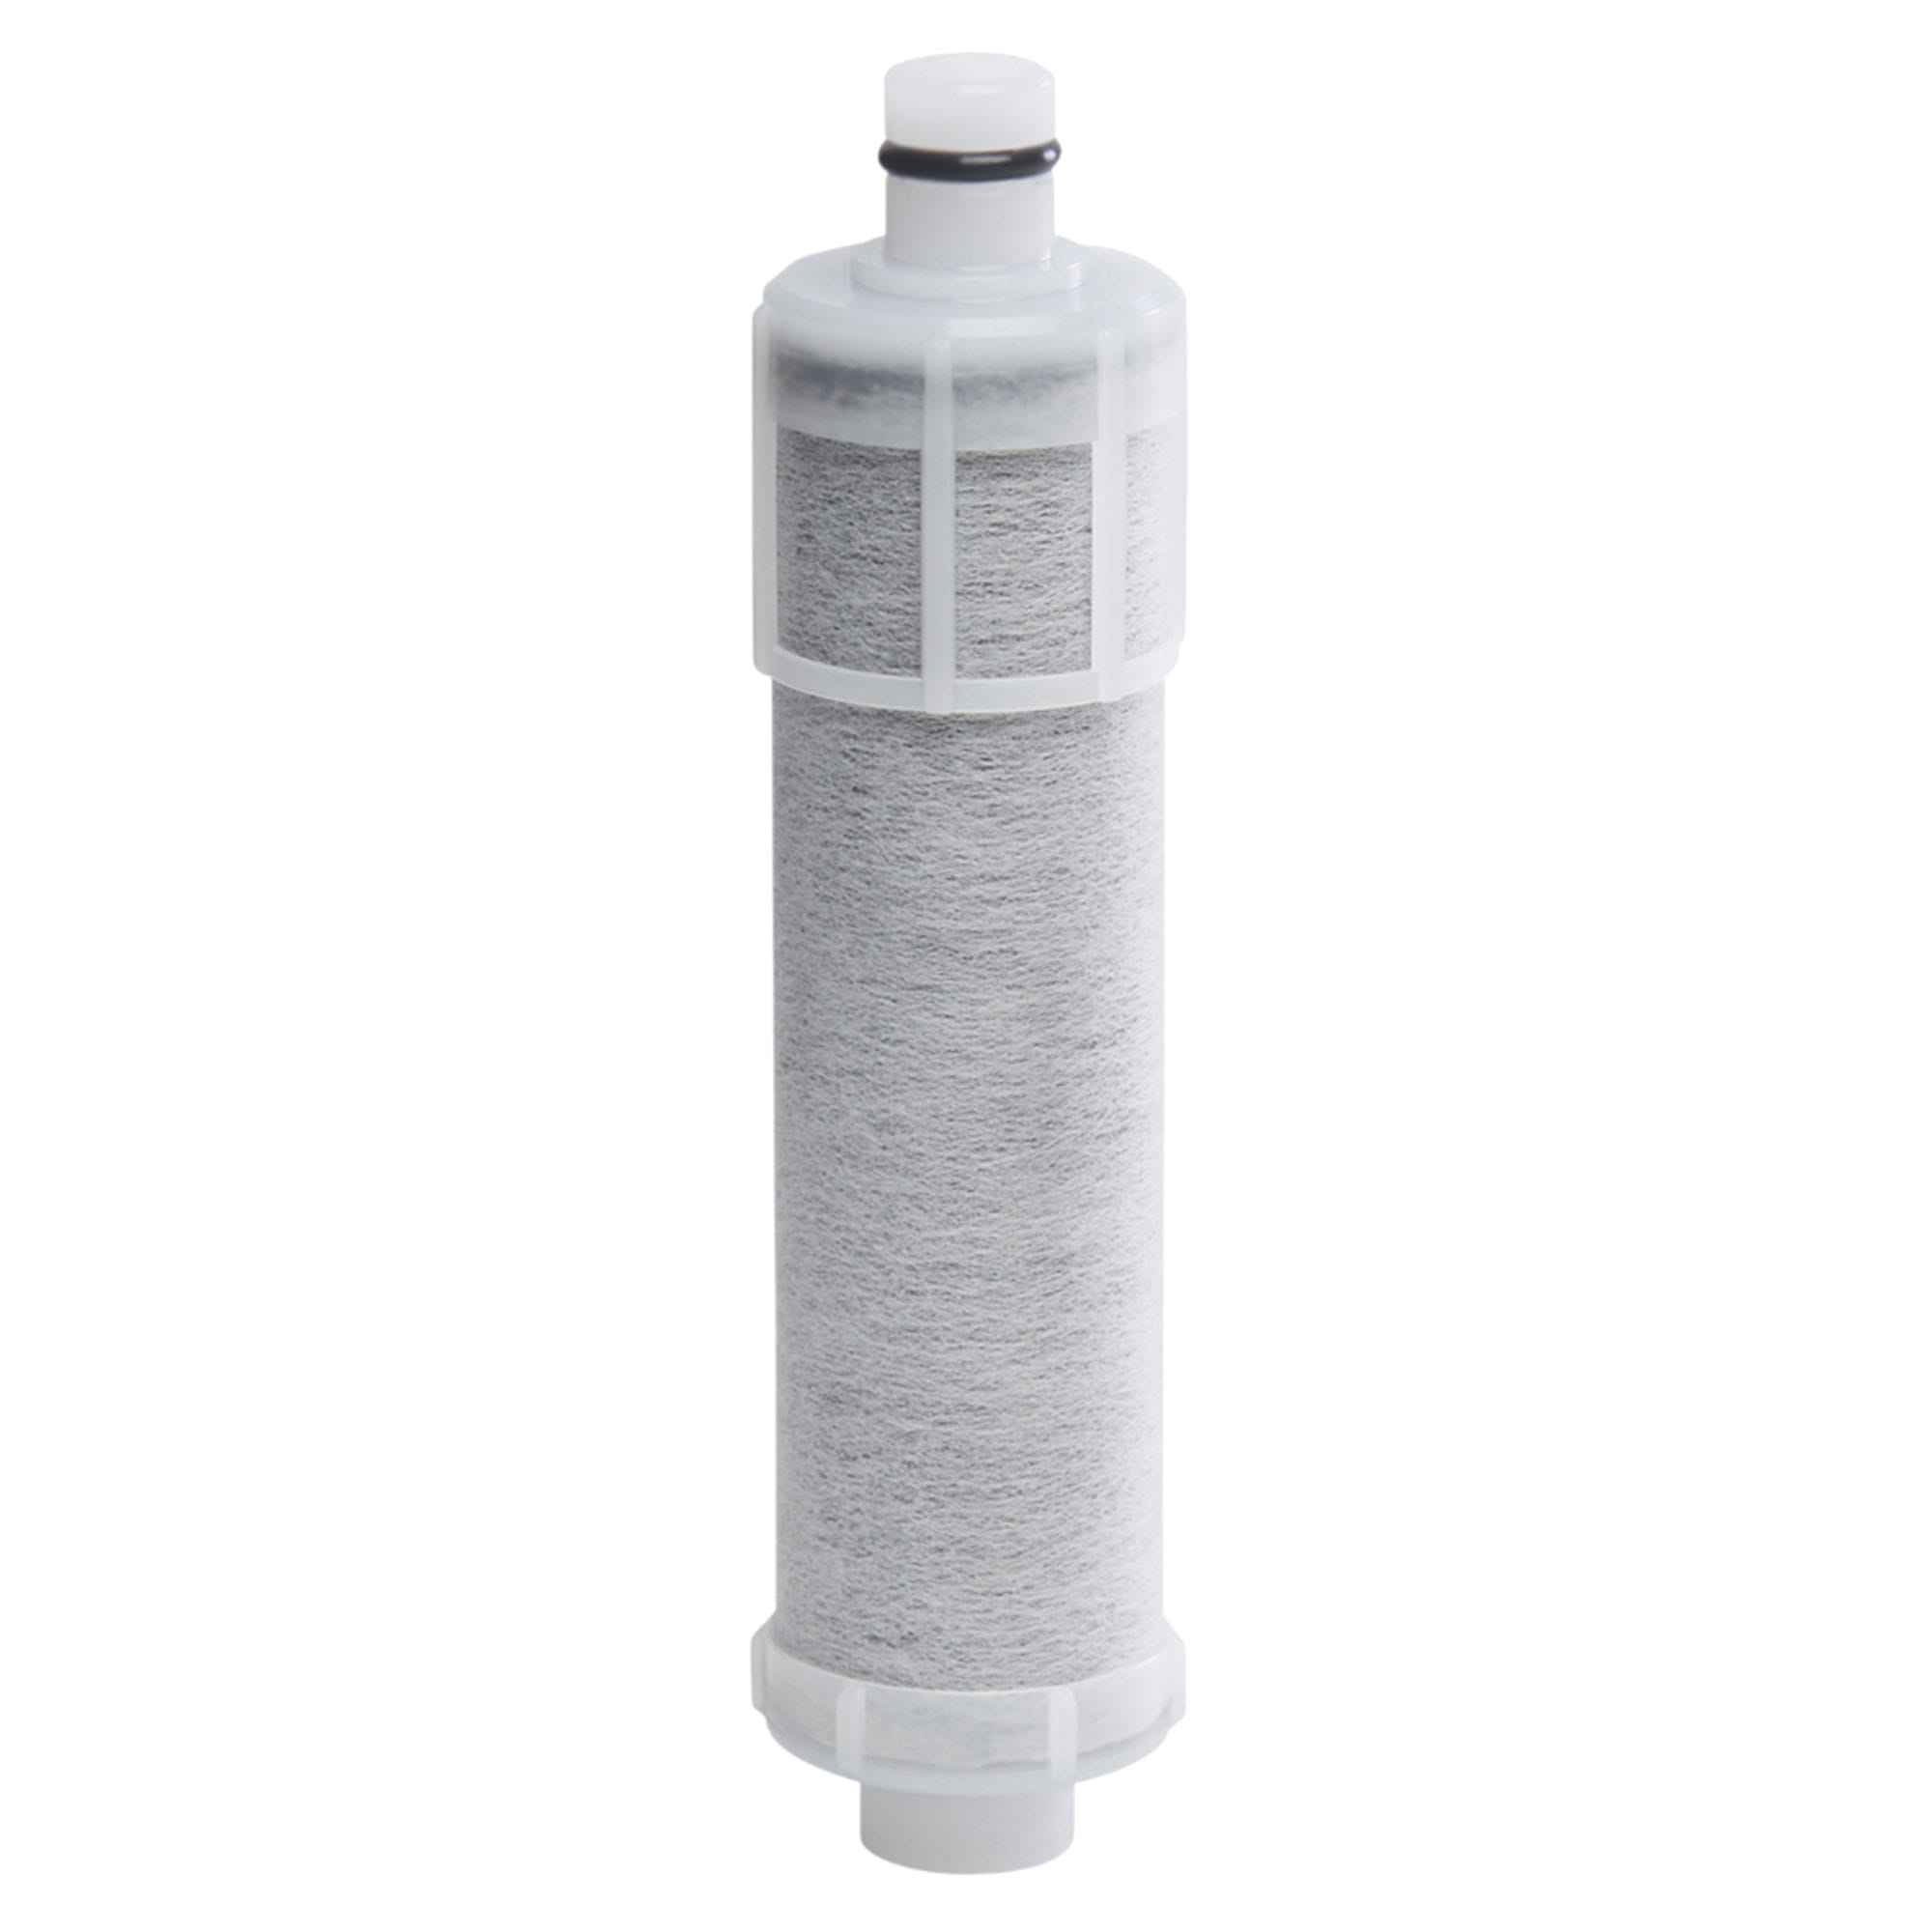 Kitchen Filter Replacement Cartridge for Saybrook Faucet NO FINISH